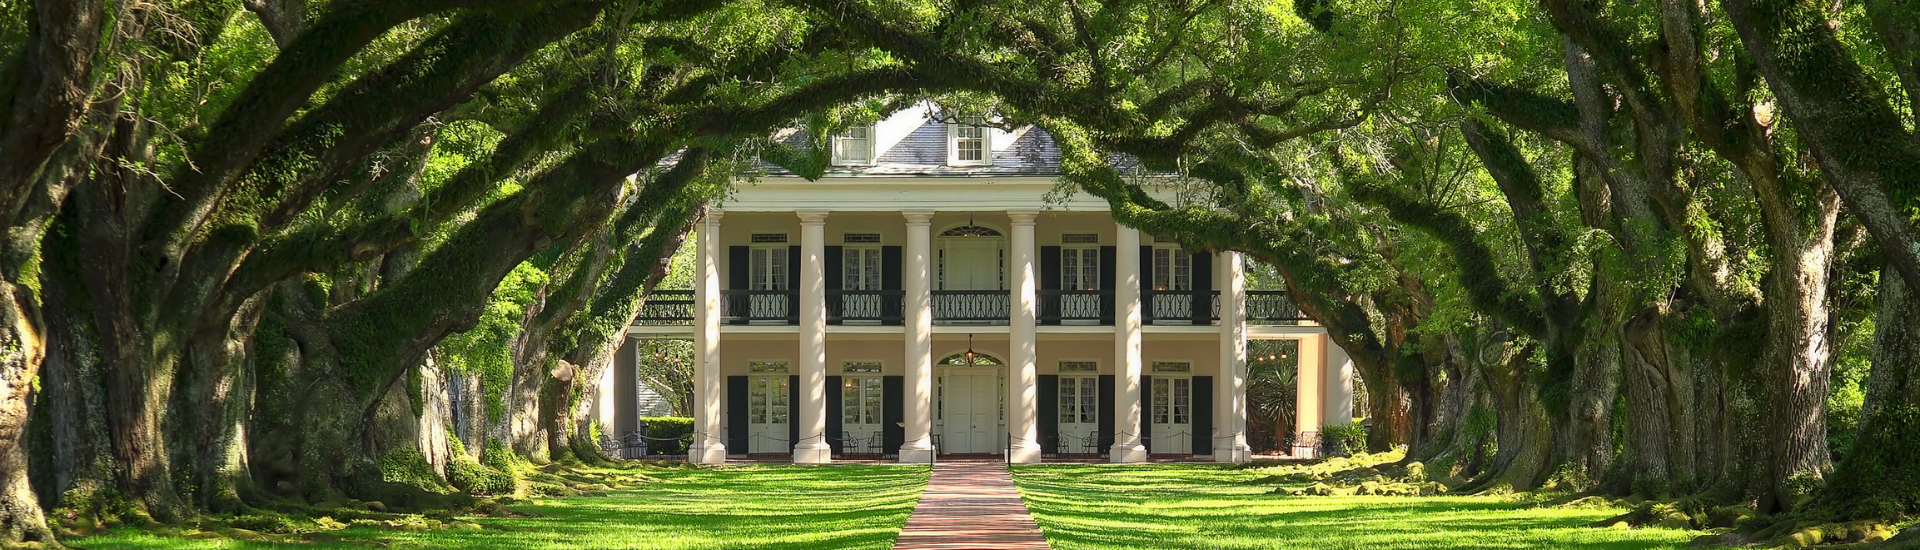 Two Story white columned plantation house at the end of  a long lane with two rows of trees meeting together over the top of the lane